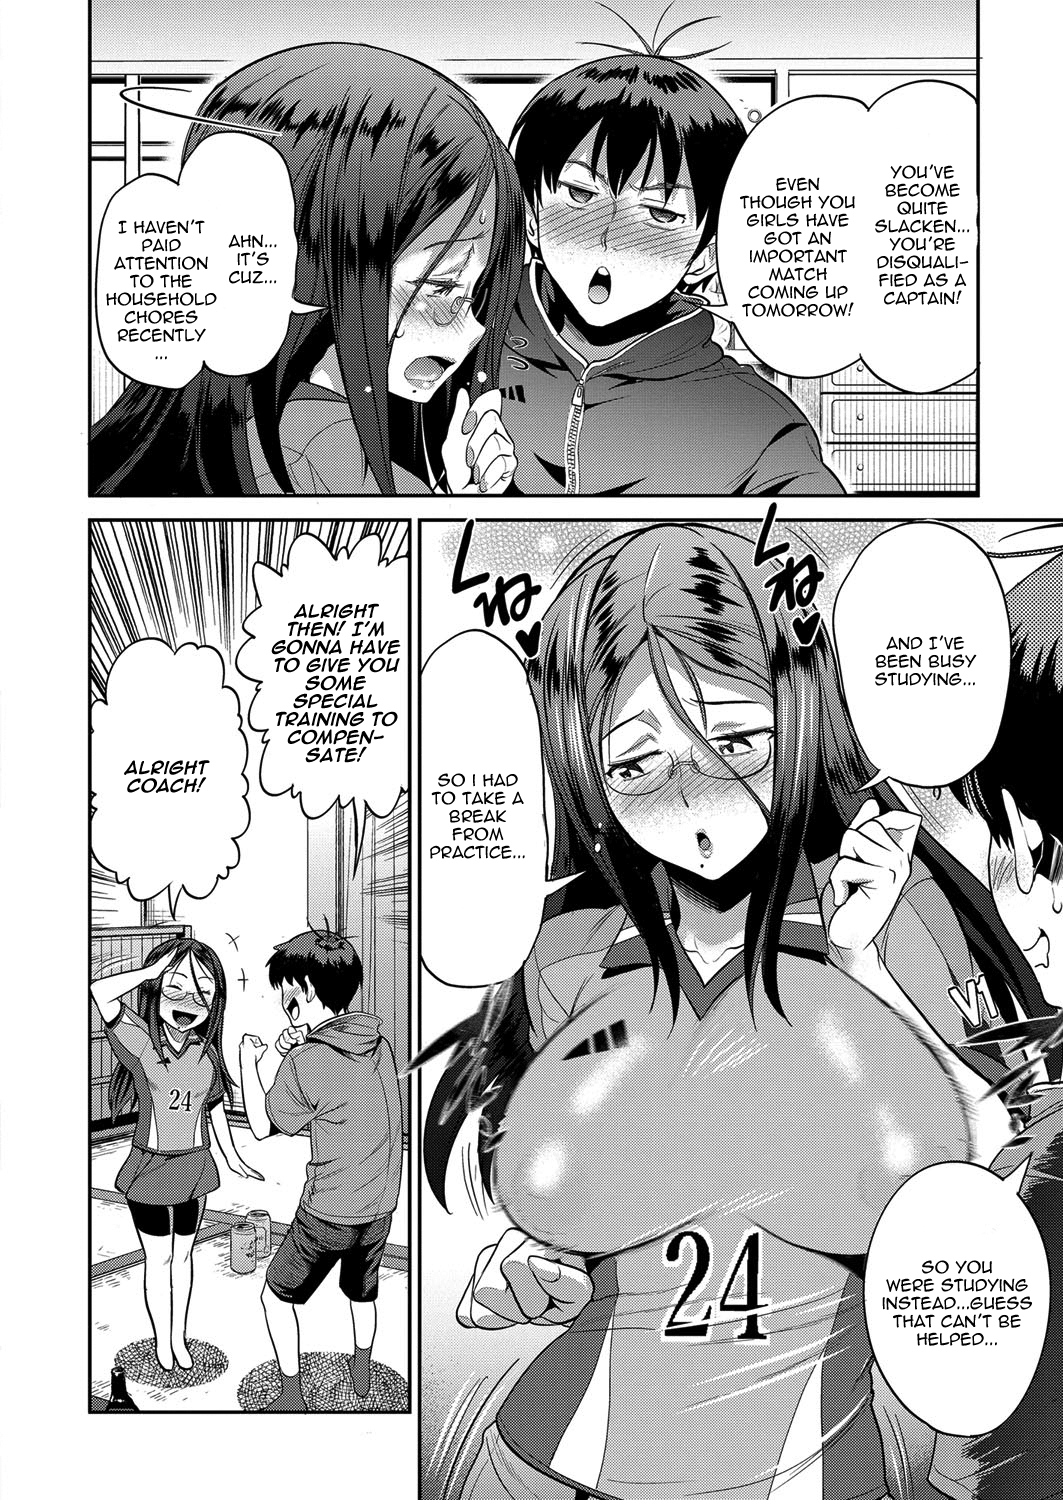 [DISTANCE] Joshi Lacu! - Girls Lacrosse Club ~2 Years Later~ Ch. 1.5 (COMIC ExE 06) [English] [TripleSevenScans] [Digital] [DISTANCE] じょしラク！～2Years Later～ 第1.5話 (コミック エグゼ 06) [英訳] [DL版]